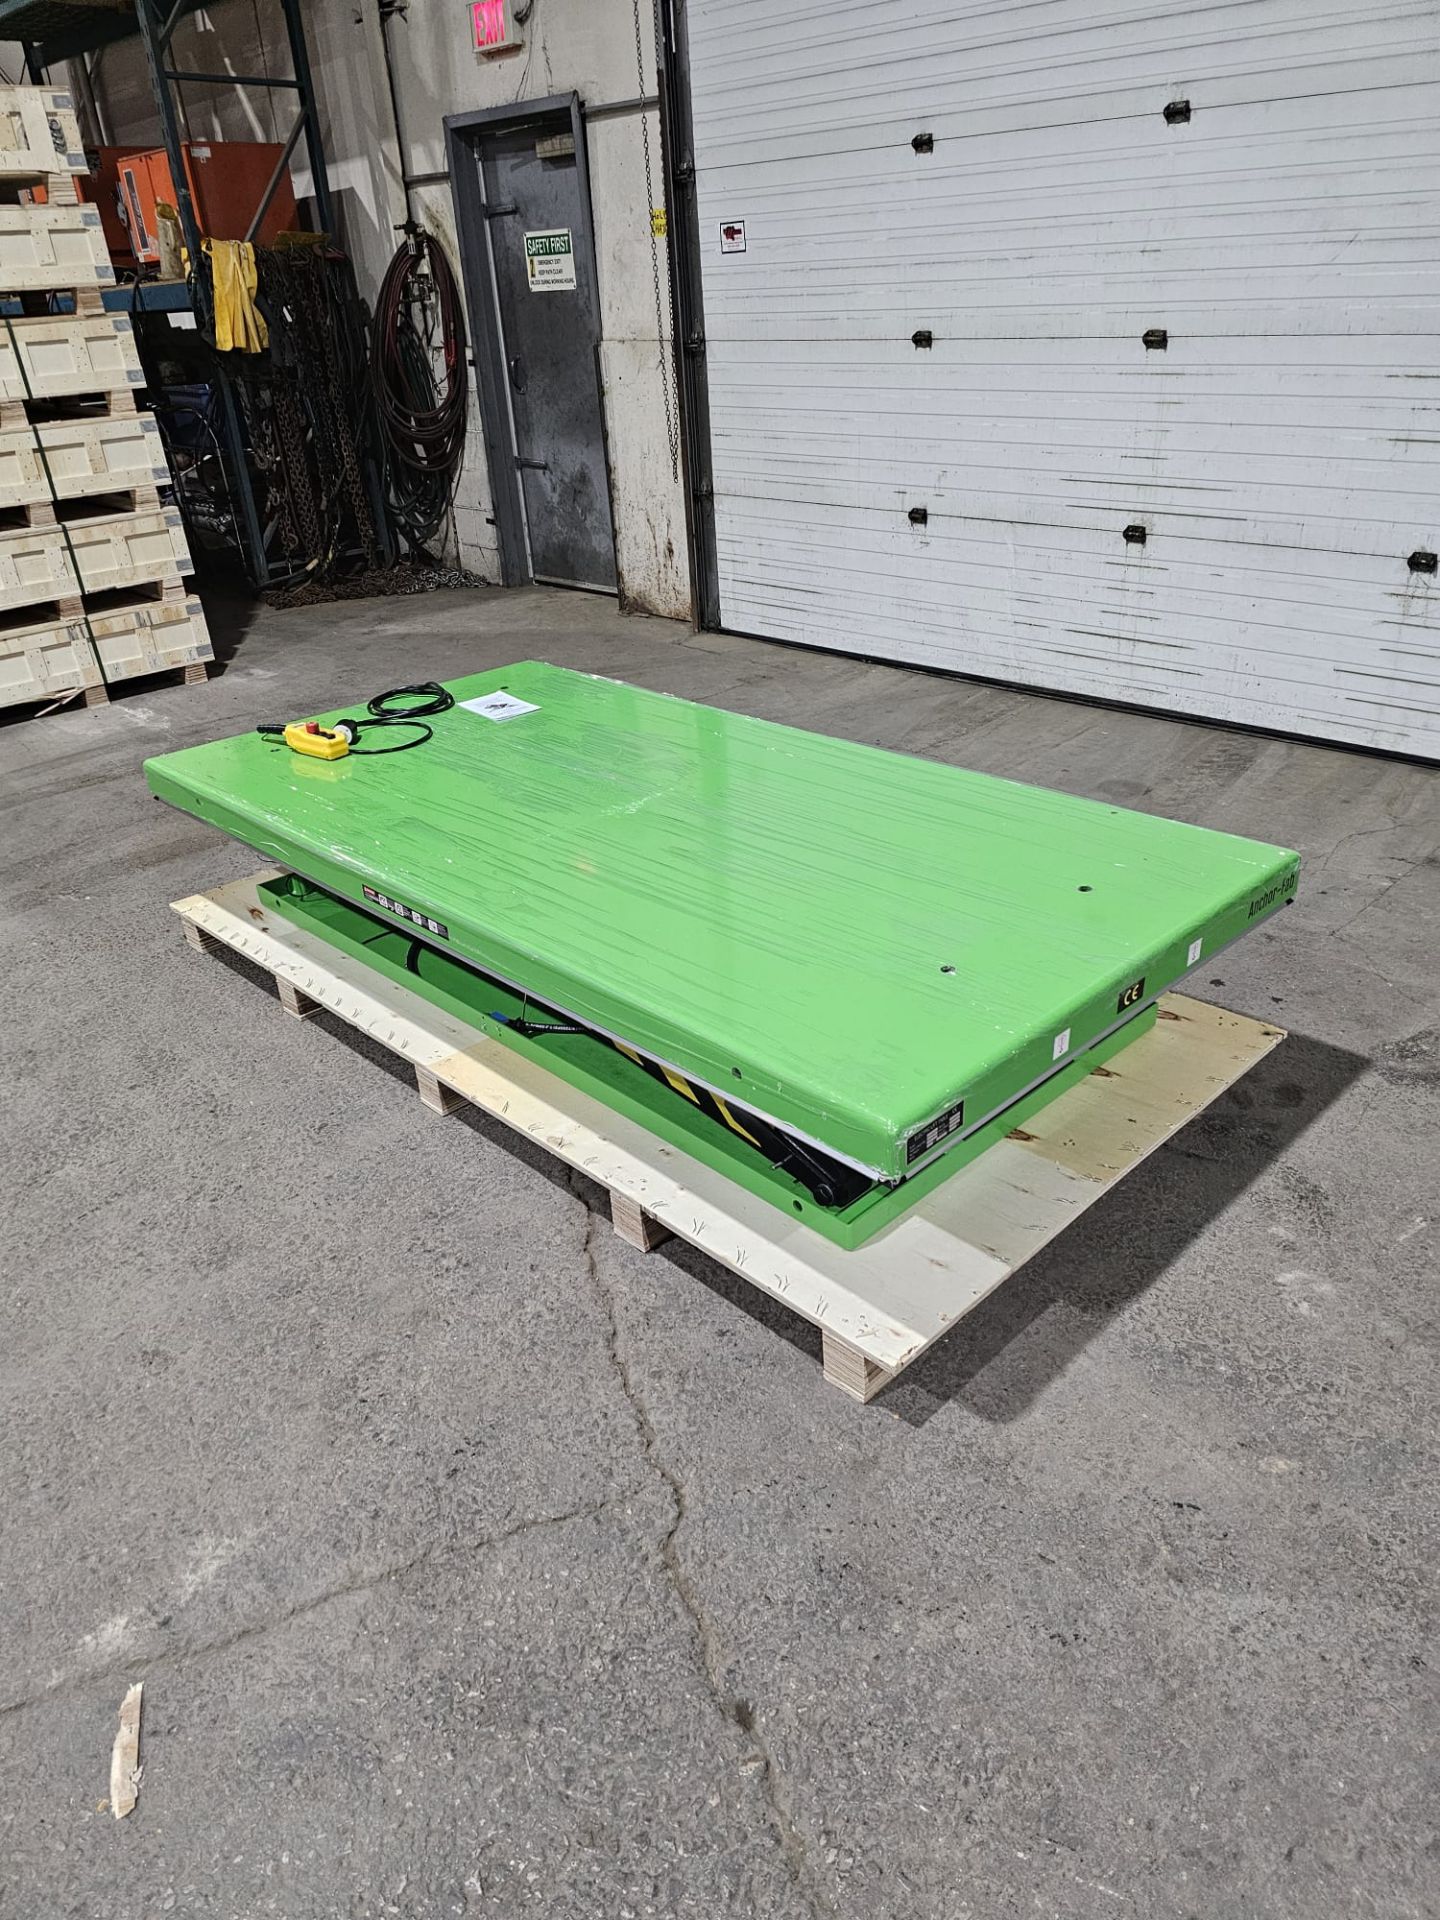 HW Hydraulic Lift Table 94" x 47" x 64" lift - 11,000lbs capacity - UNUSED and MINT - 220V - Image 3 of 8